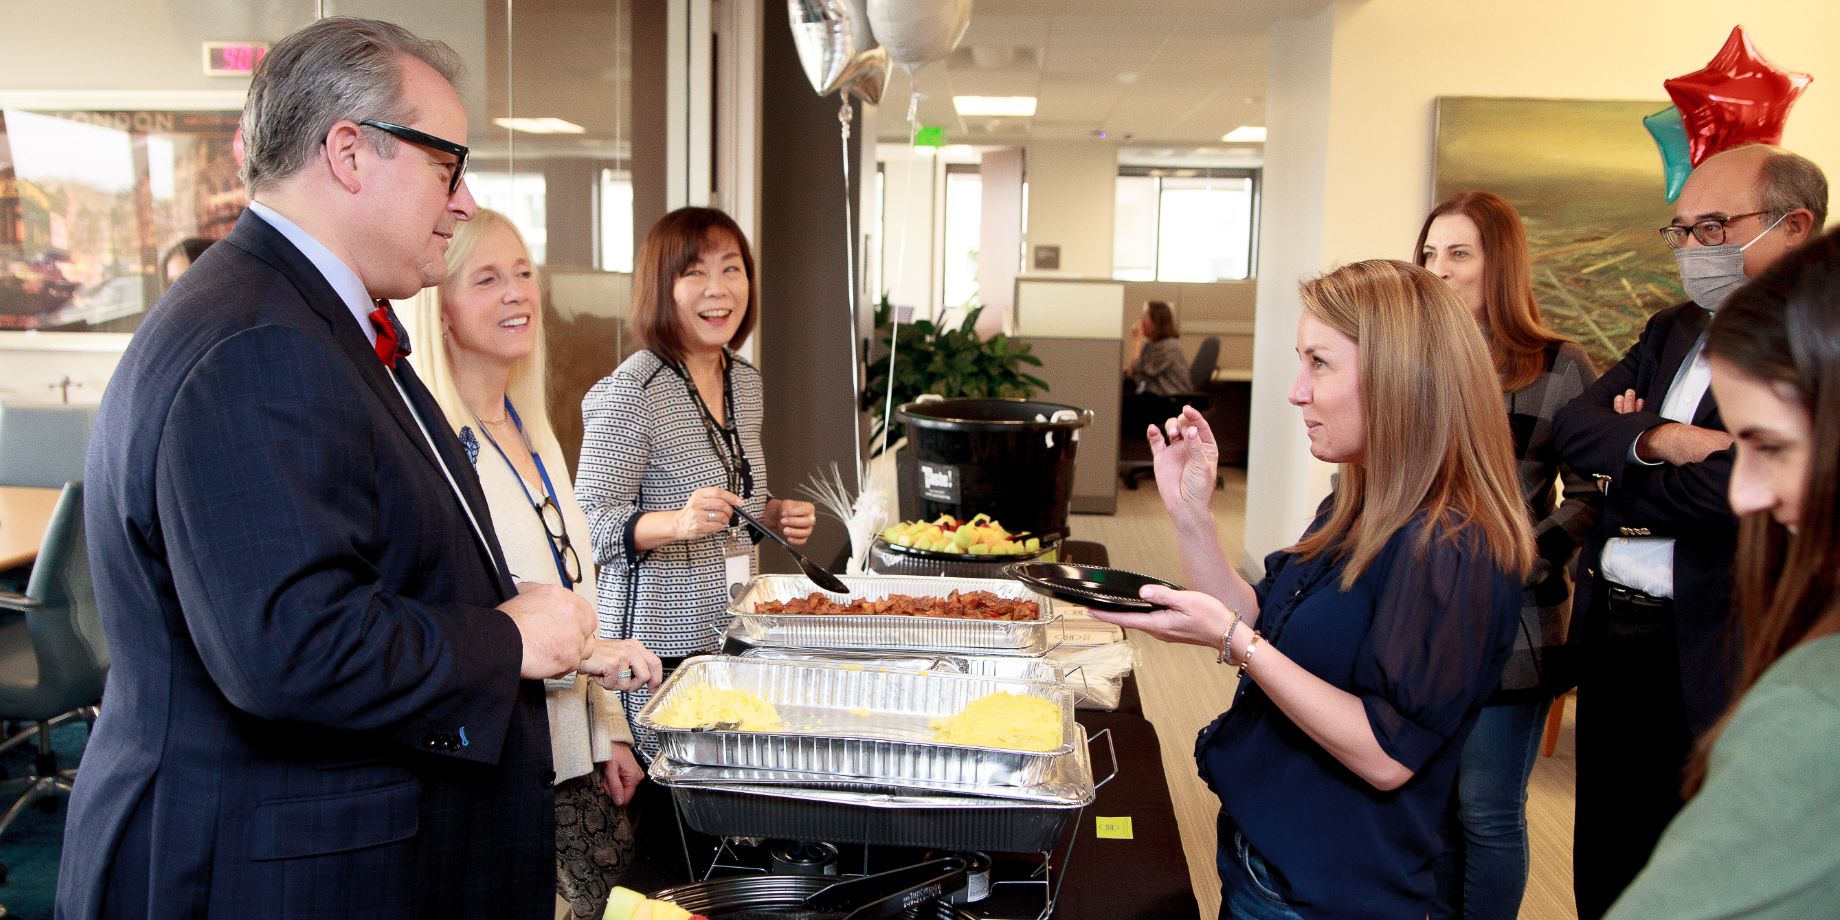 Employee Appreciation Day—Senior Management serves employees with breakfast.